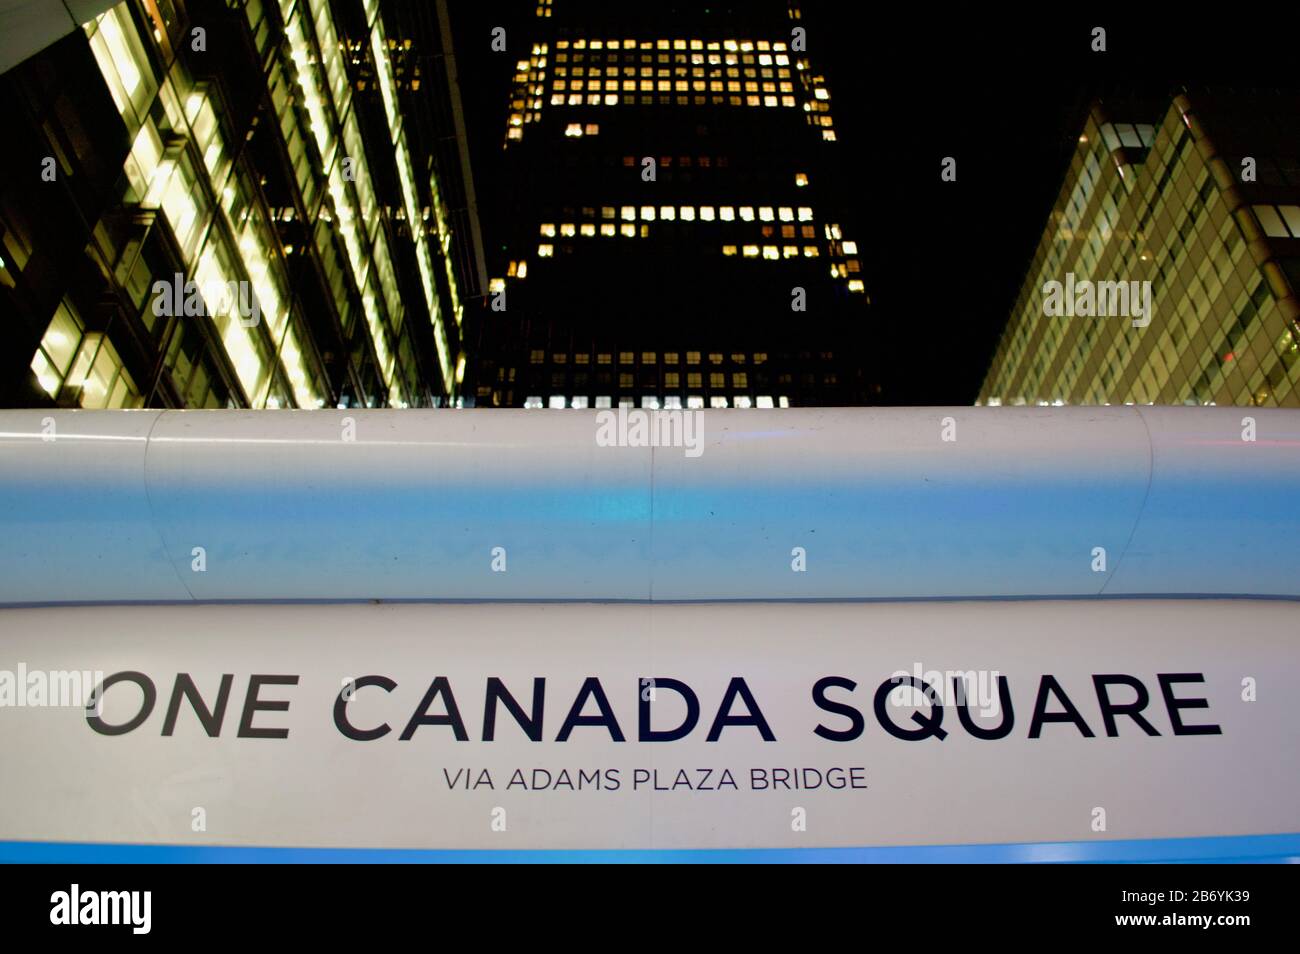 One Canada Square sign at Canary Wharf, London, UK Stock Photo